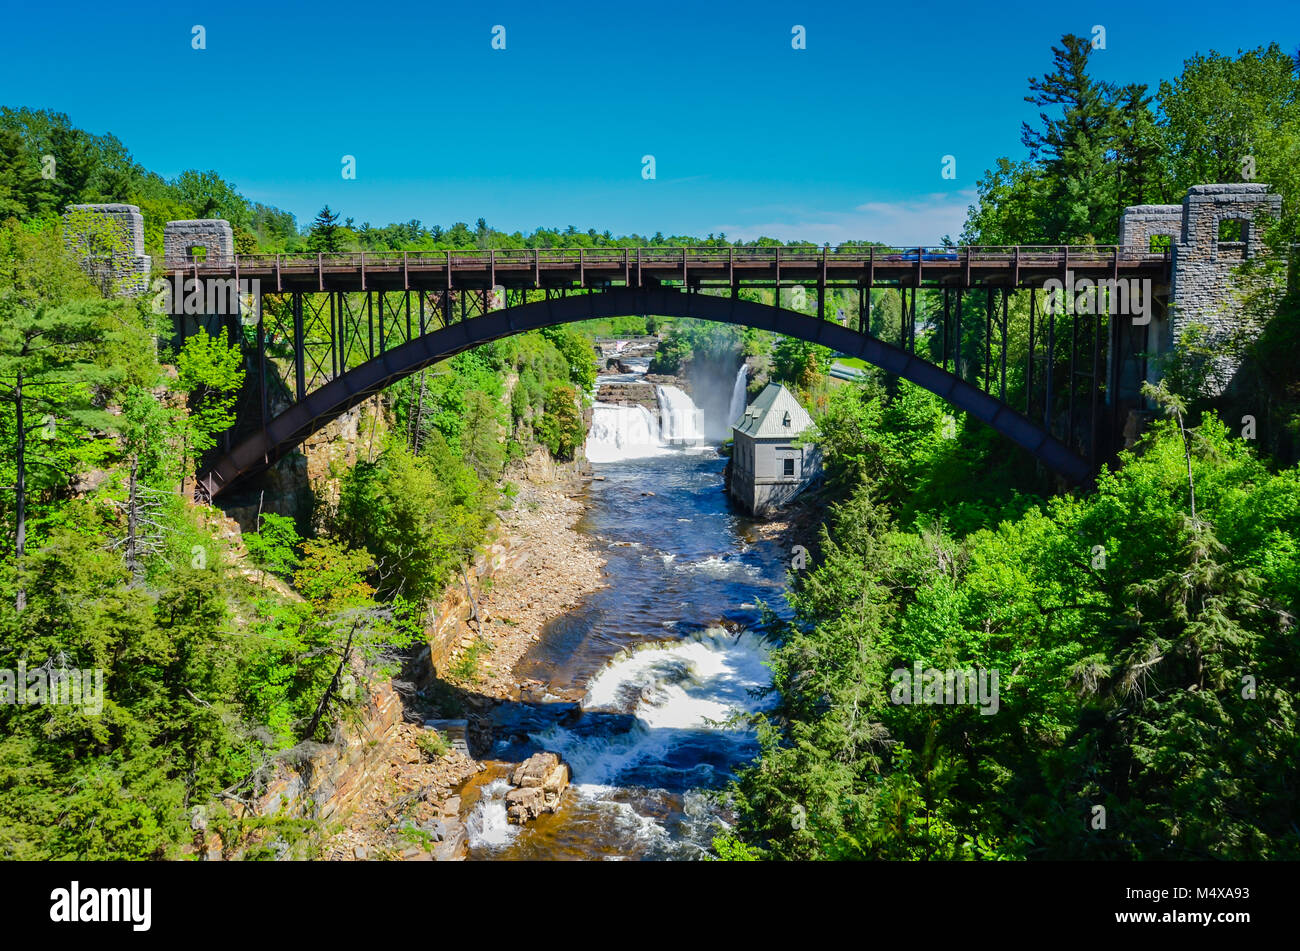 Bridge over Ausable River at Ausable Chasm, a tourist attraction in Upstate NY. Stock Photo